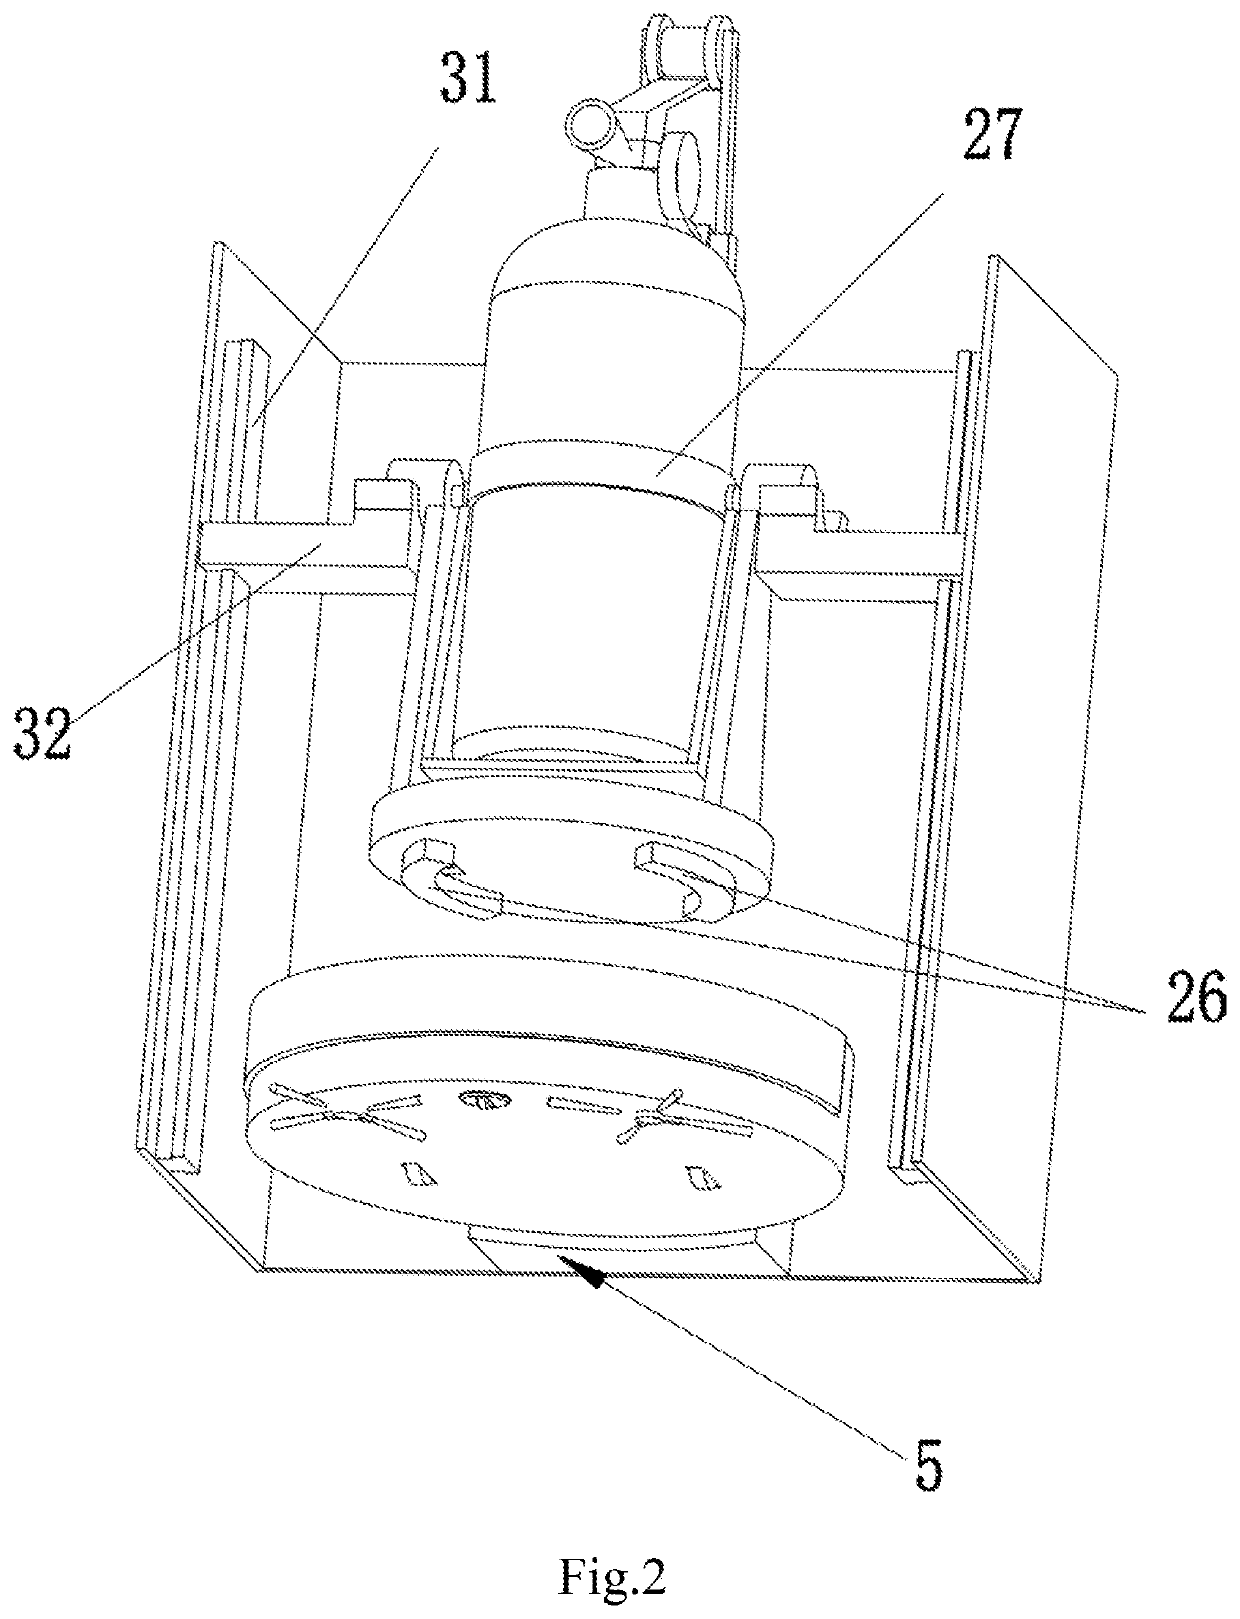 Sweeping and fire extinguishing device